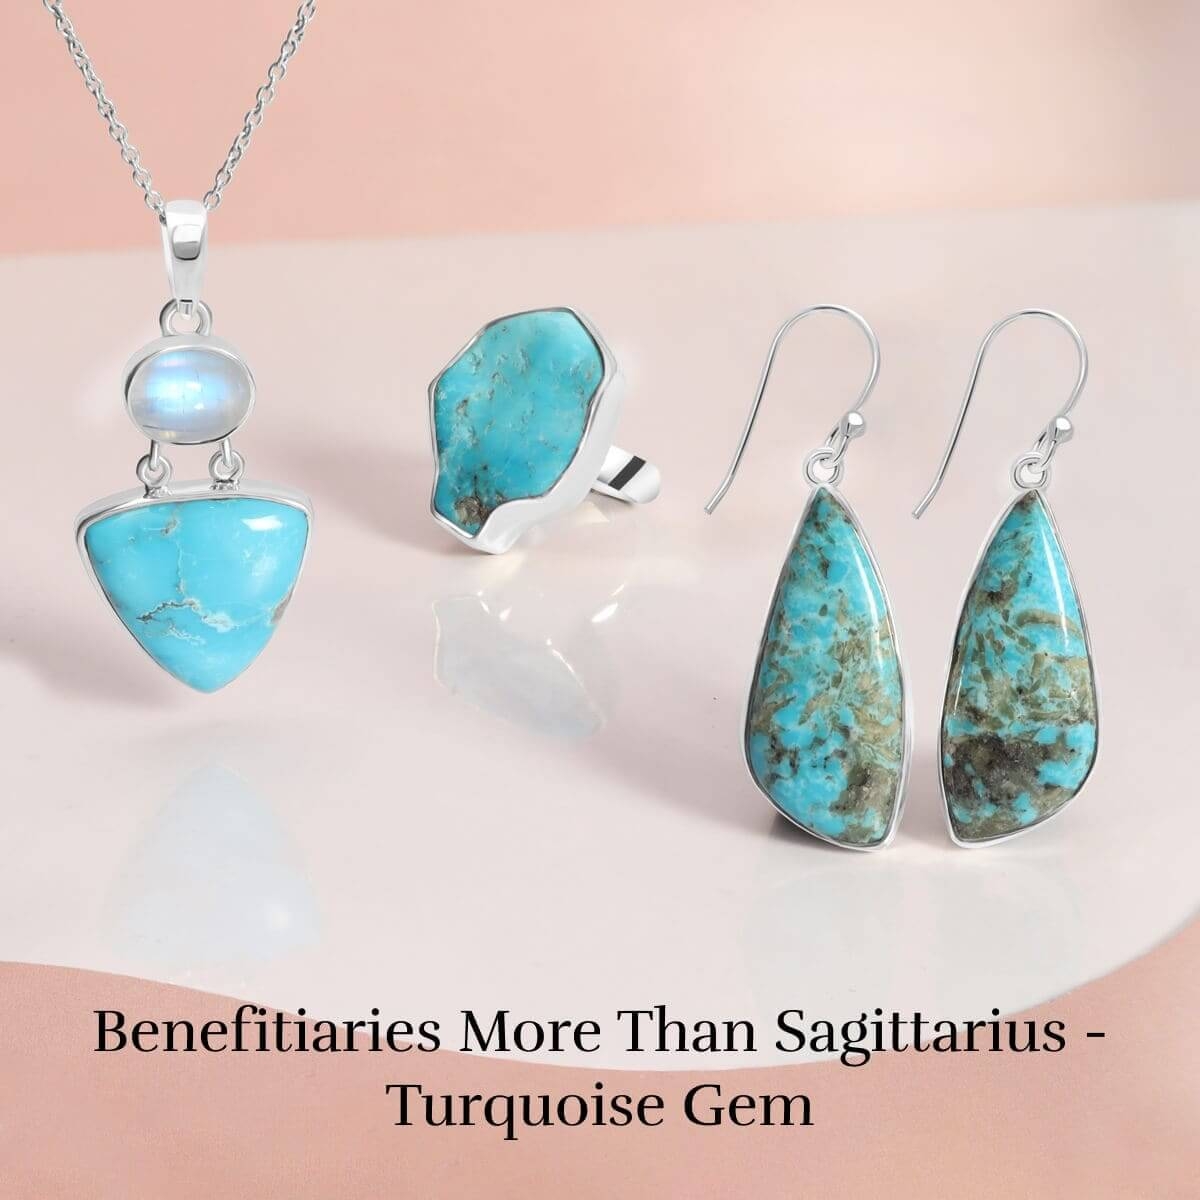 Which Zodiac Sign Can Benefit From Wearing Turquoise?